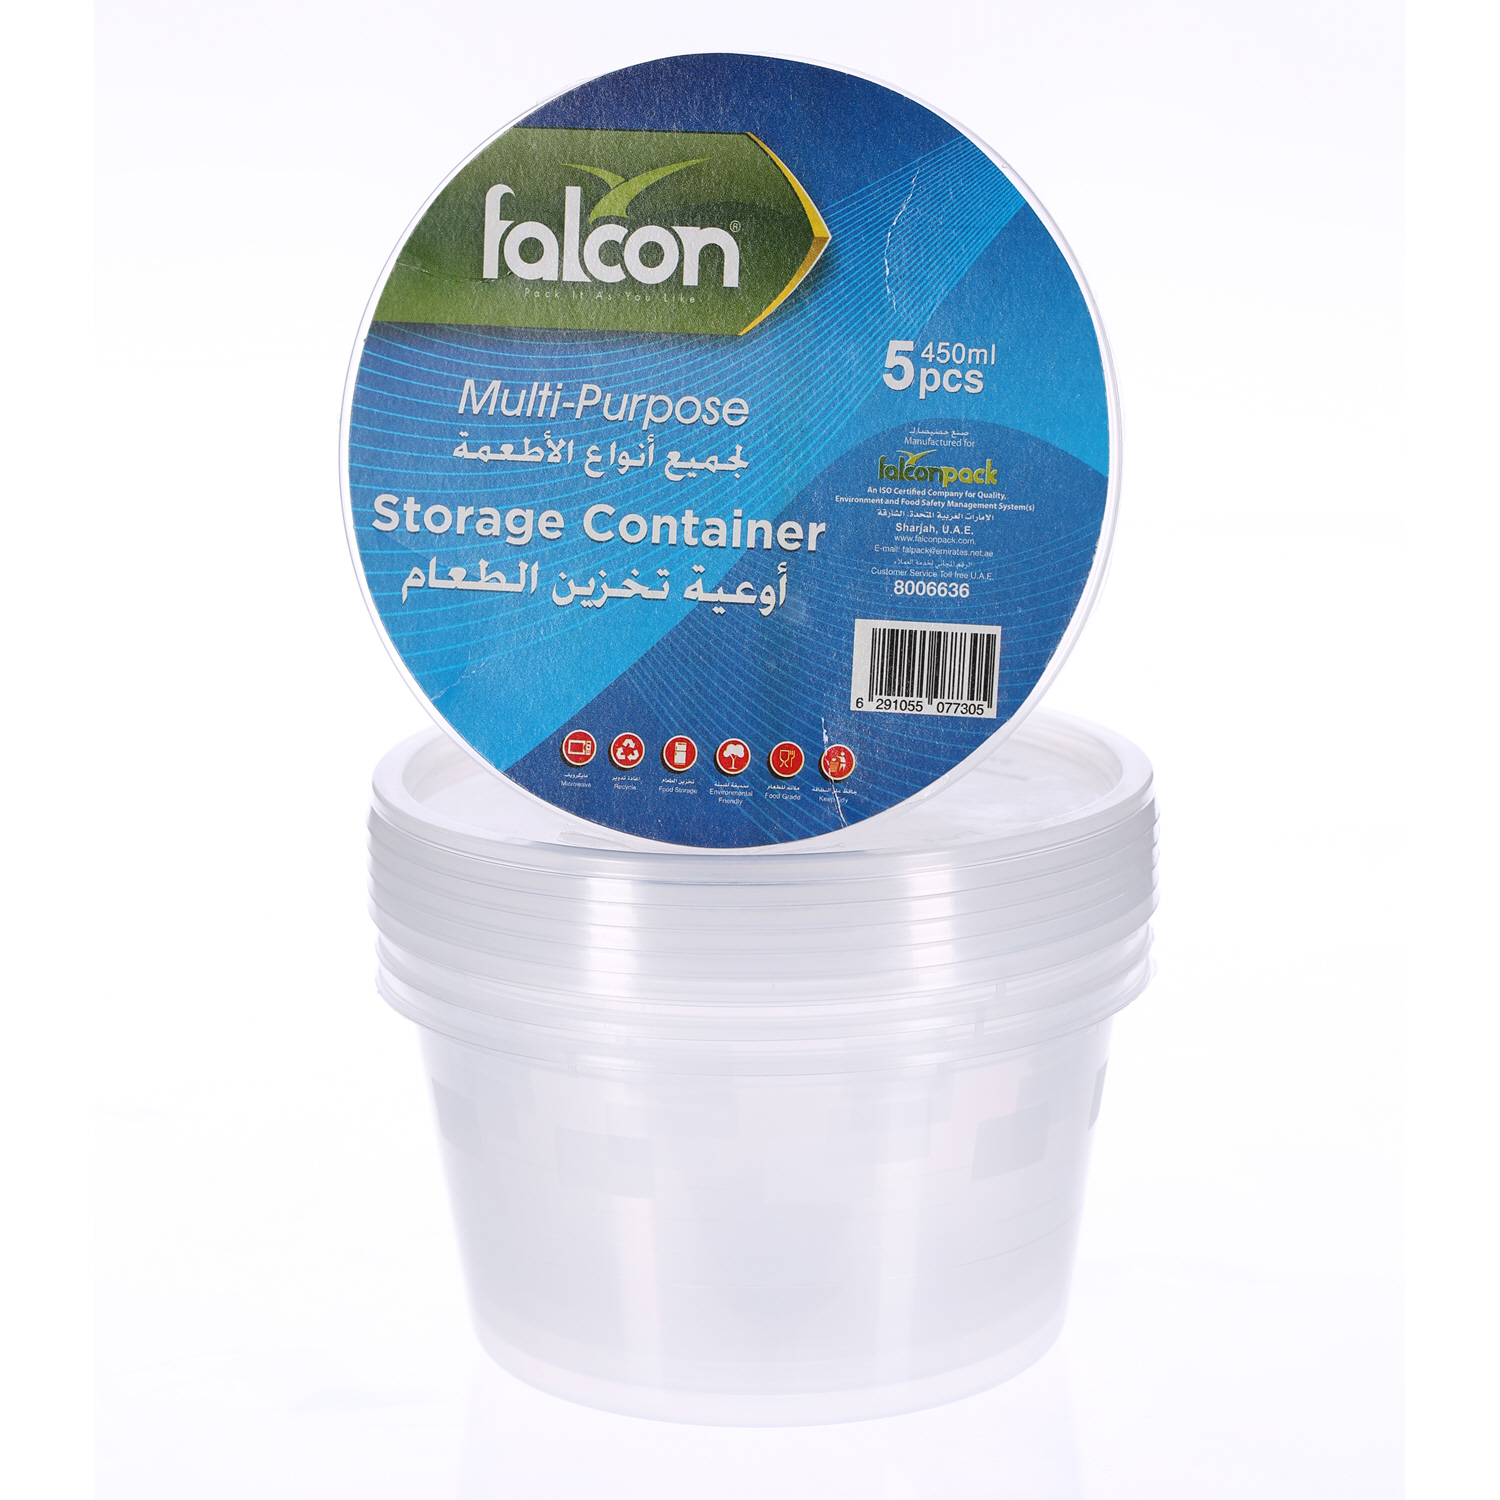 Falcon Retail Microwave Container Round 450Cc with Lid 5 Pack